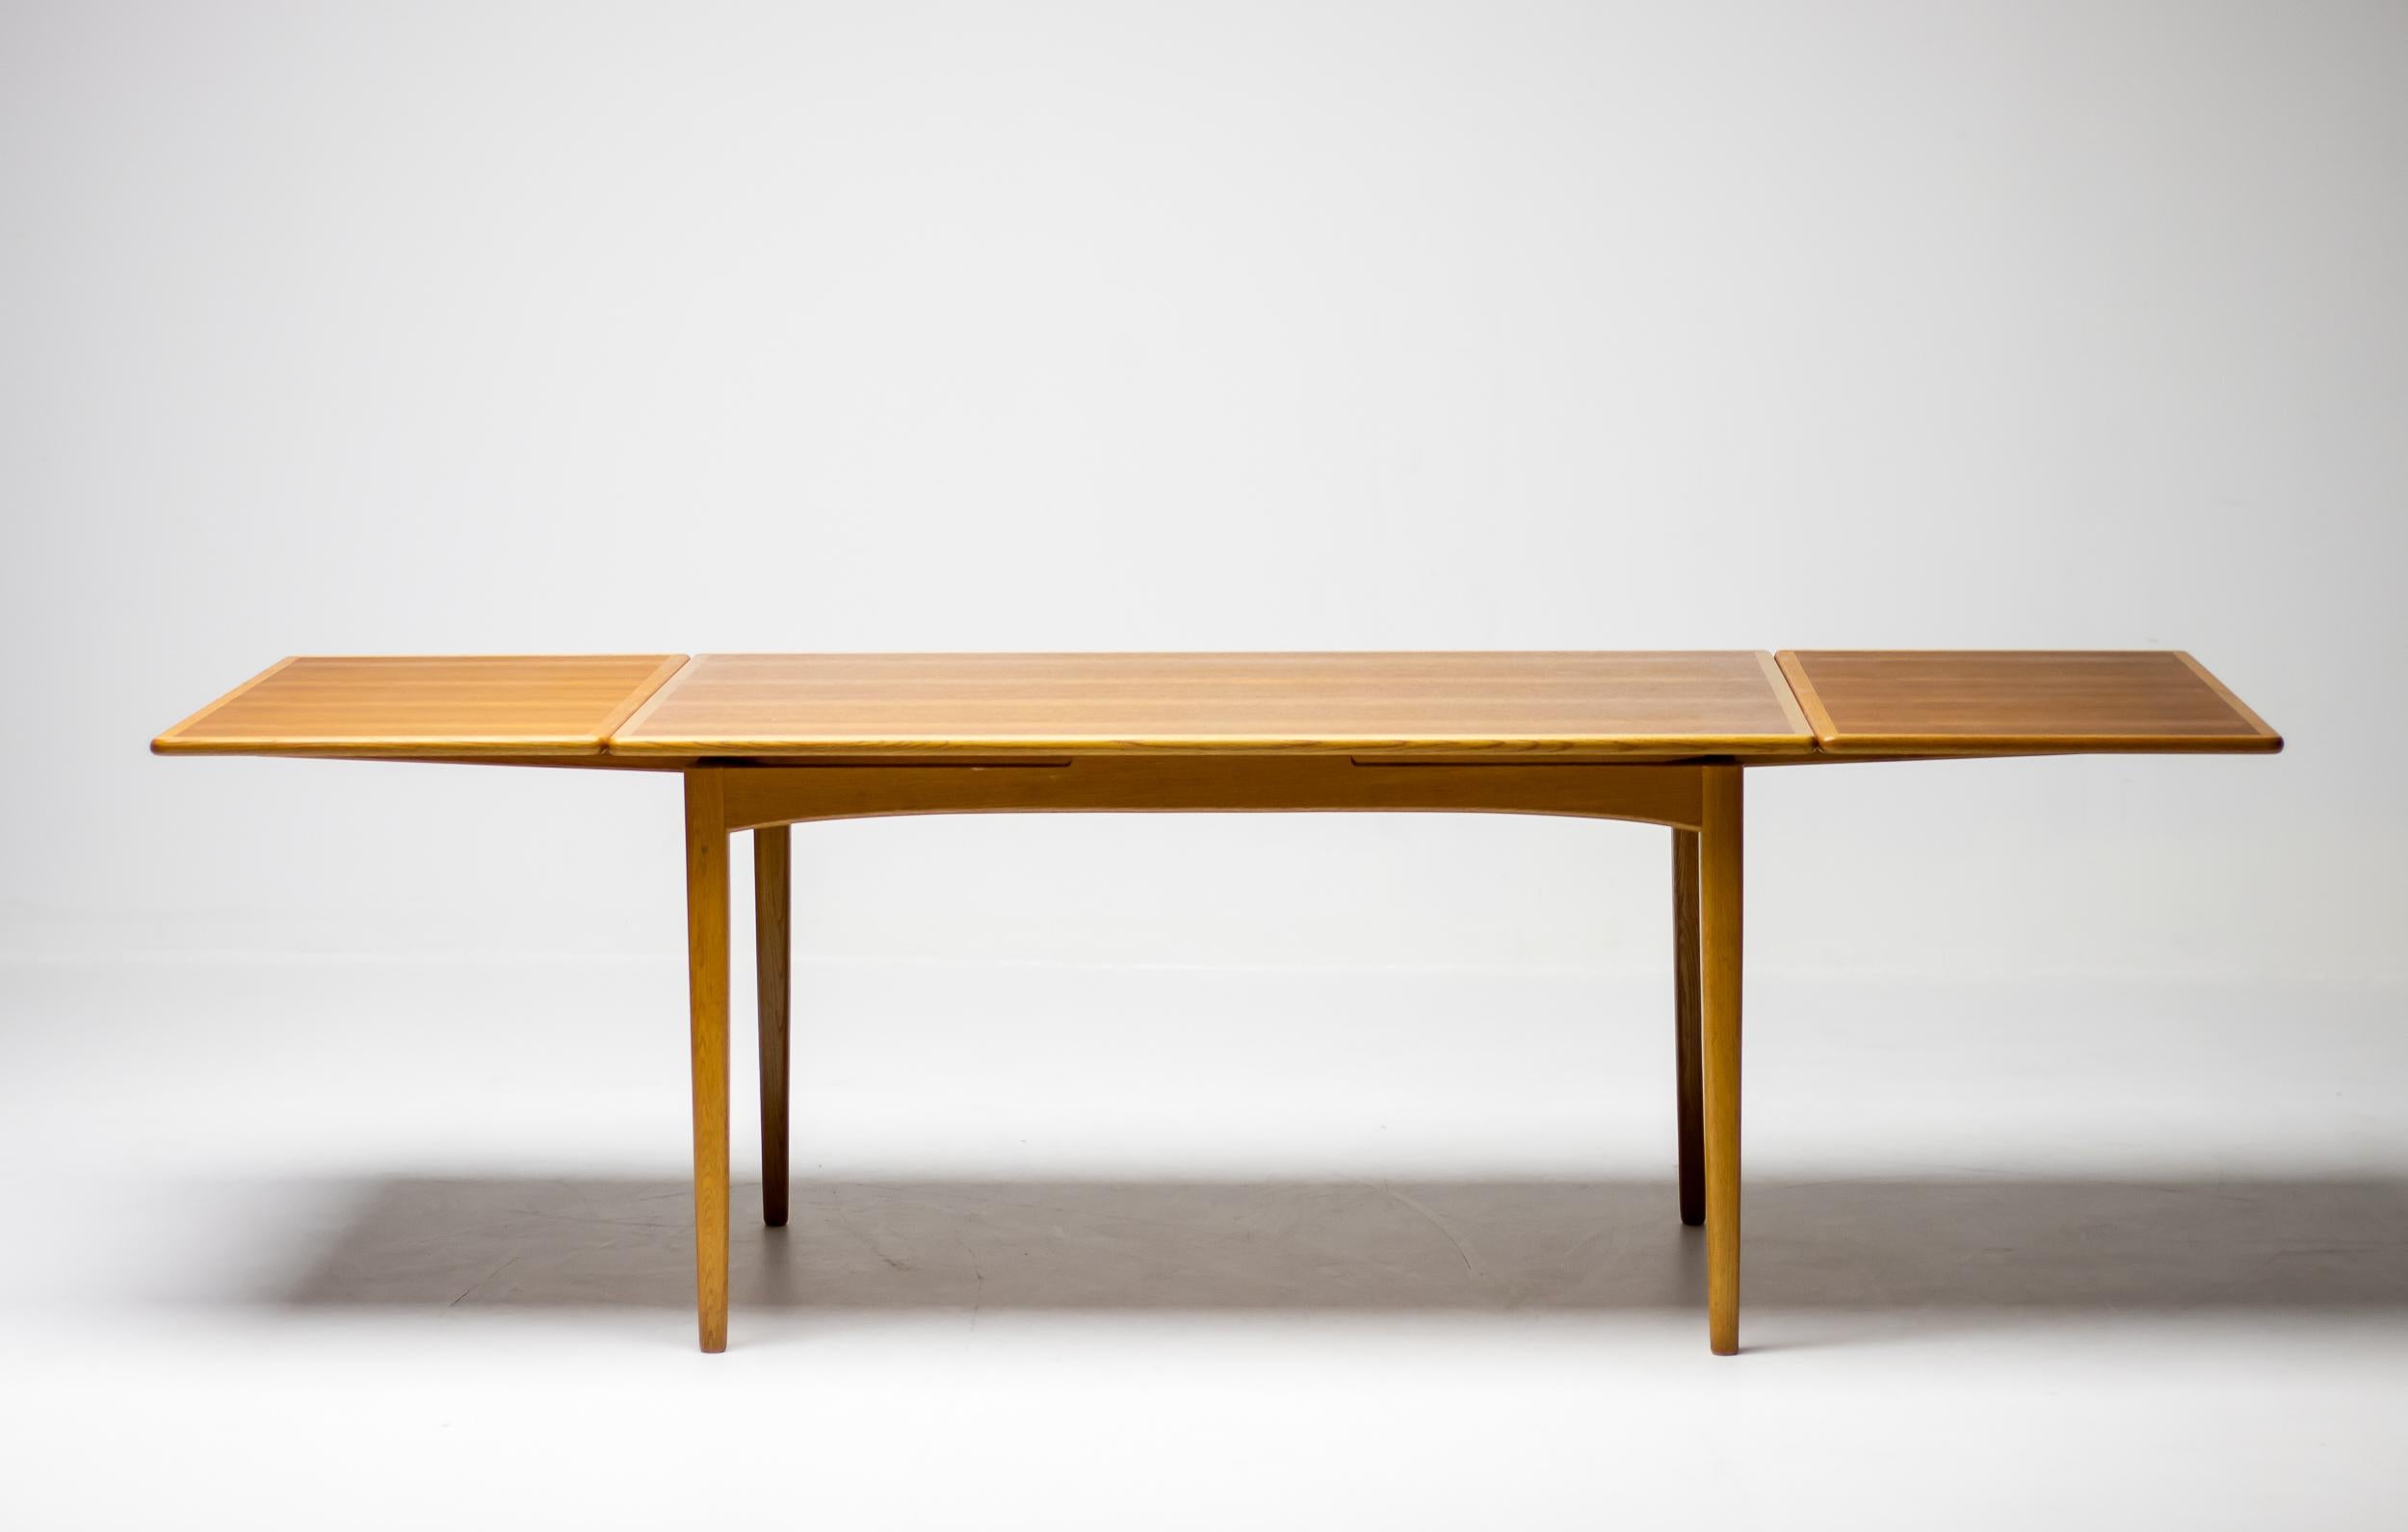 This extendable dining table designed by Yngvar Sandström for Nordiska Kompaniet, Sweden is executed in oak with a teak top with oak edges. The rectangular tabletop has two additional leaves in order to expand the table from 137 cm to 244 cm. The